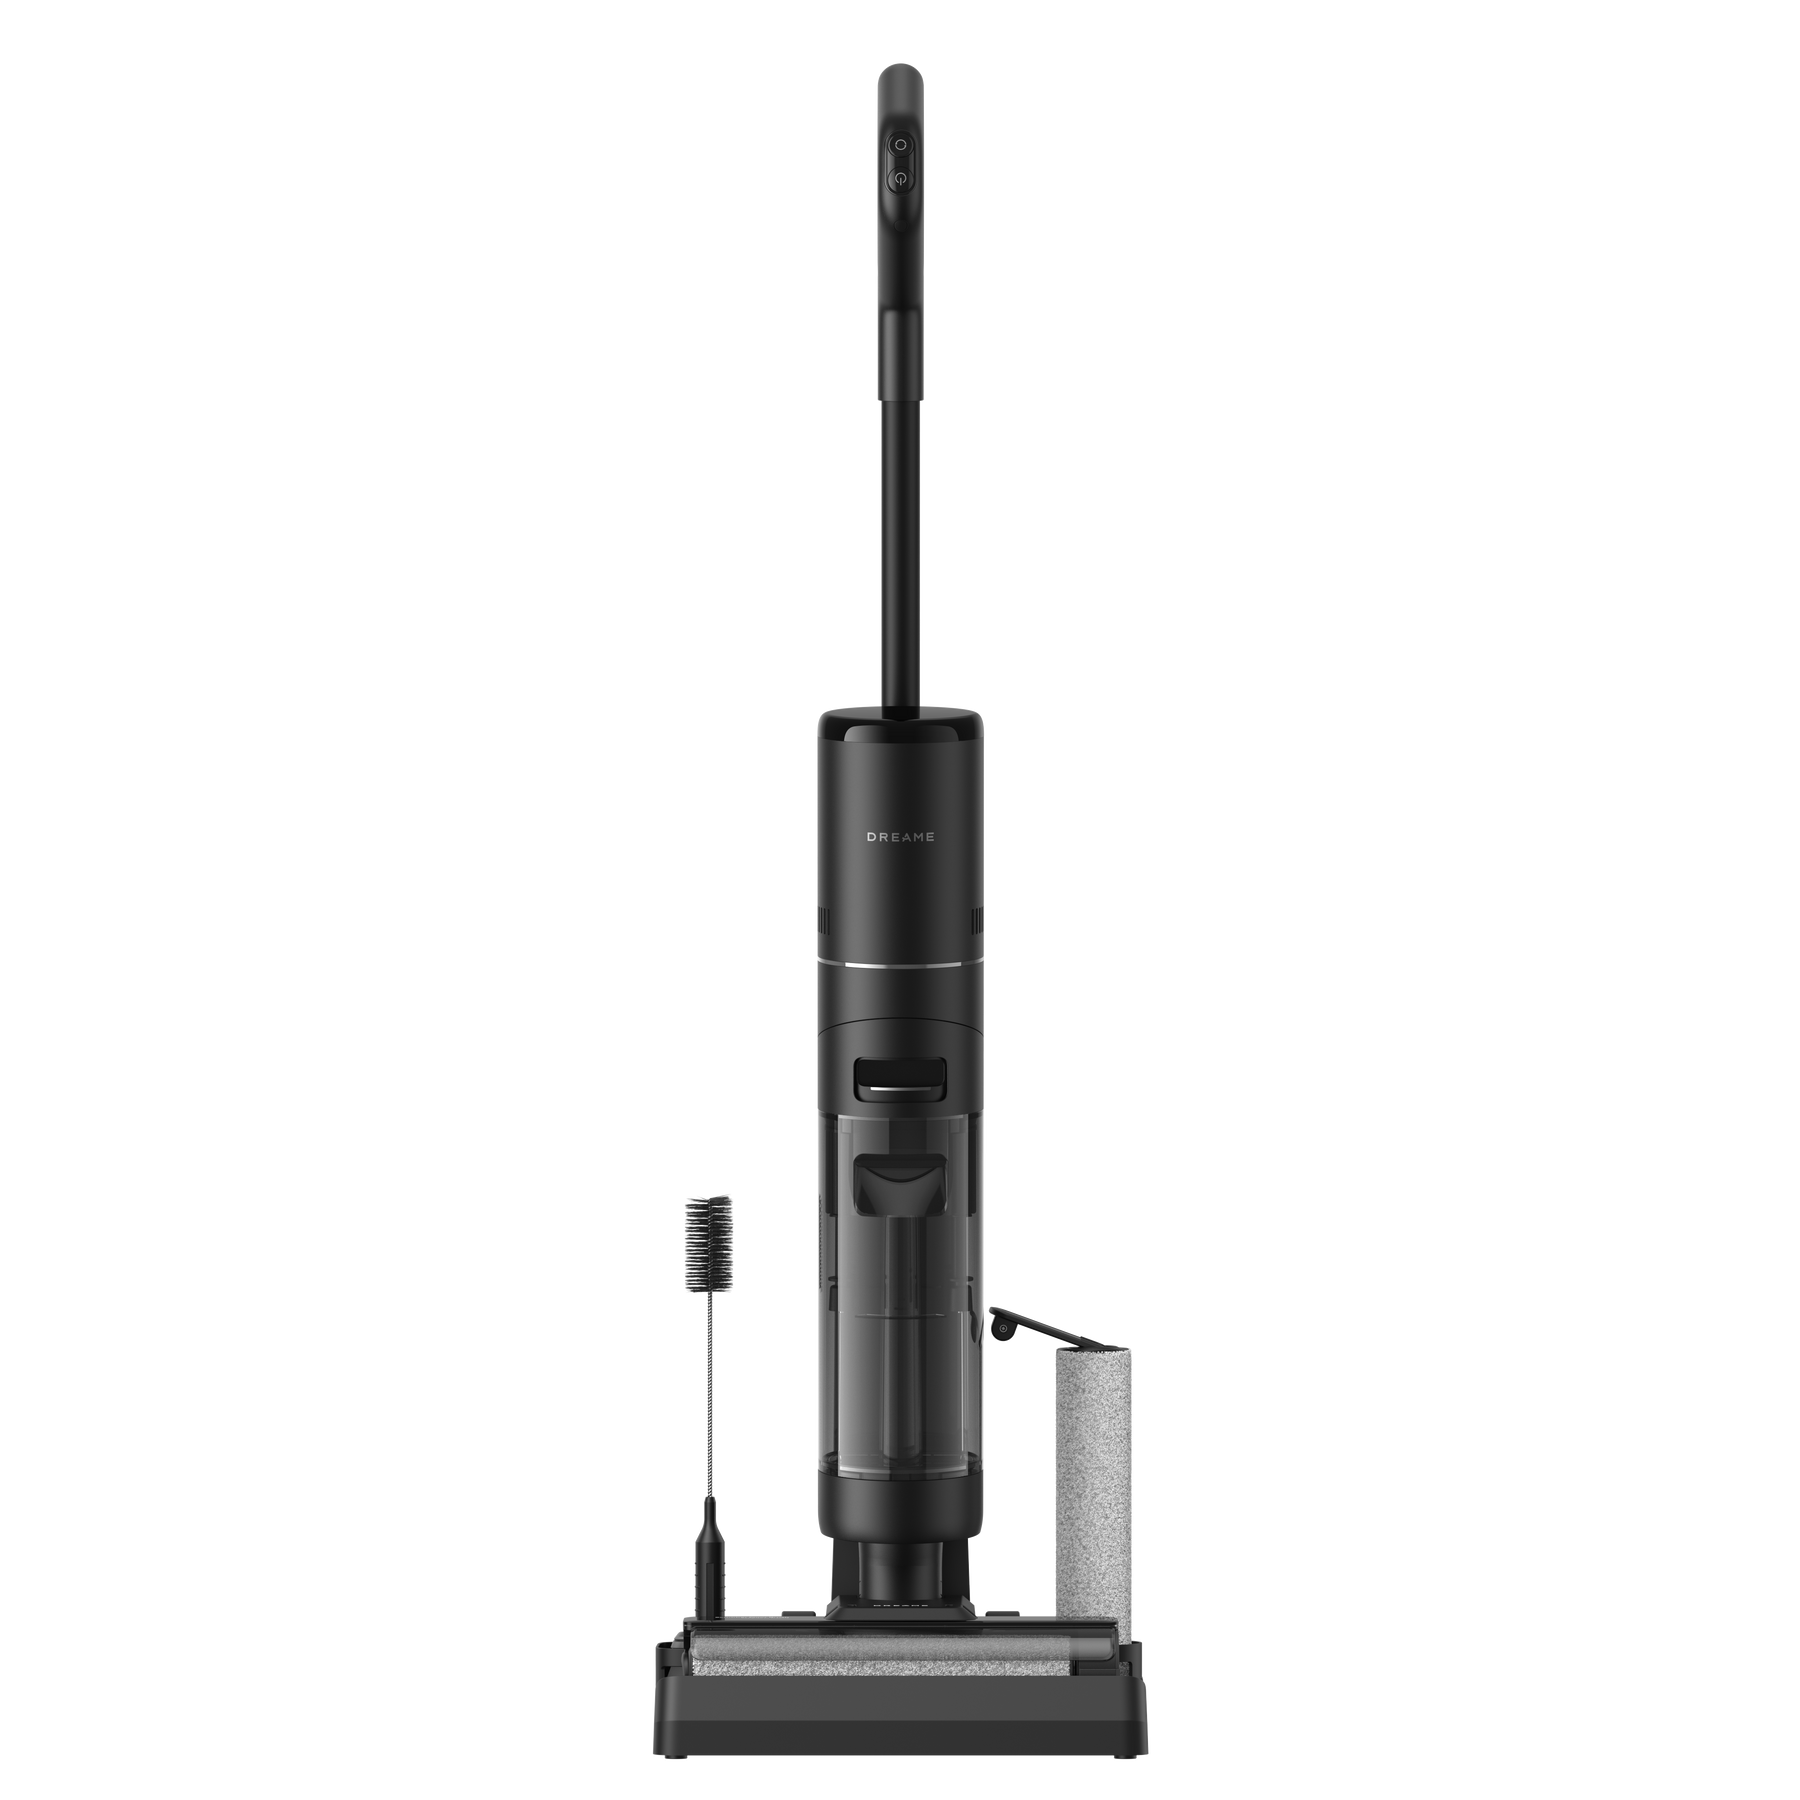 Dreame H12s AE Cordless Wet and Dry Vacuum